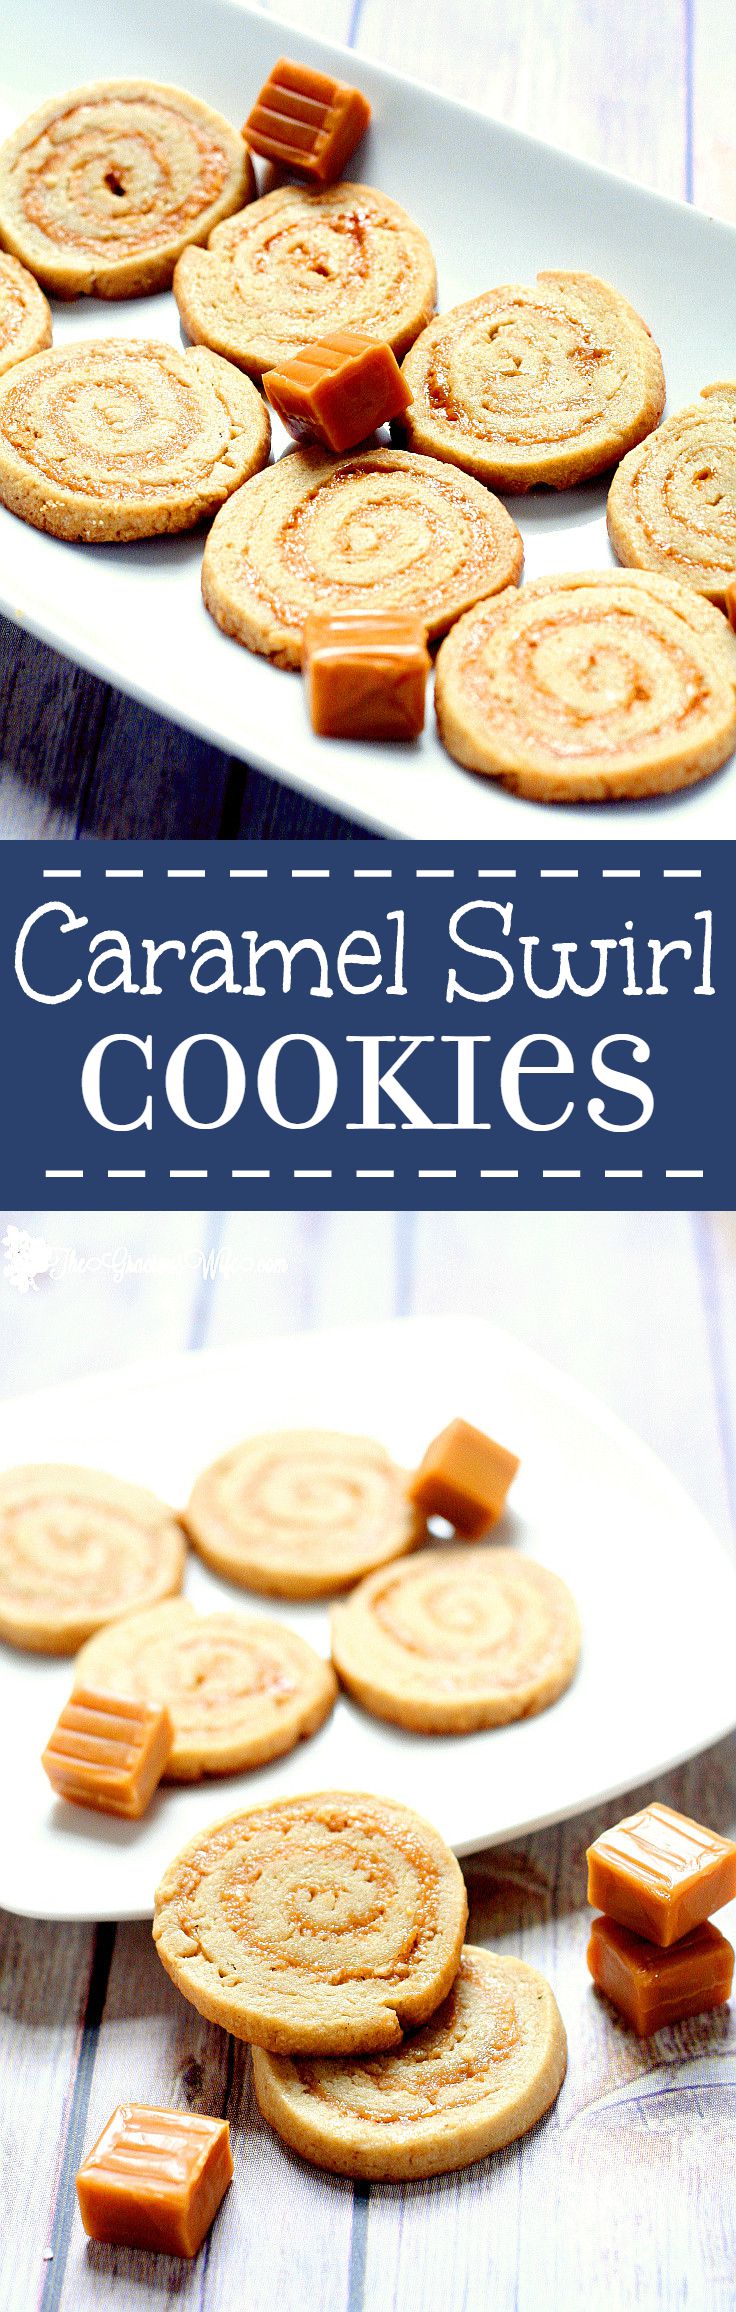 These Caramel Swirl Cookies are a wonderful combination of a soft, chewy cookie swirled with sweet, creamy caramel. Unique and delicious caramel swirl cookie recipe from scratch. Also would make a great Christmas Cookies recipe. THE BEST for caramel lovers everywhere.